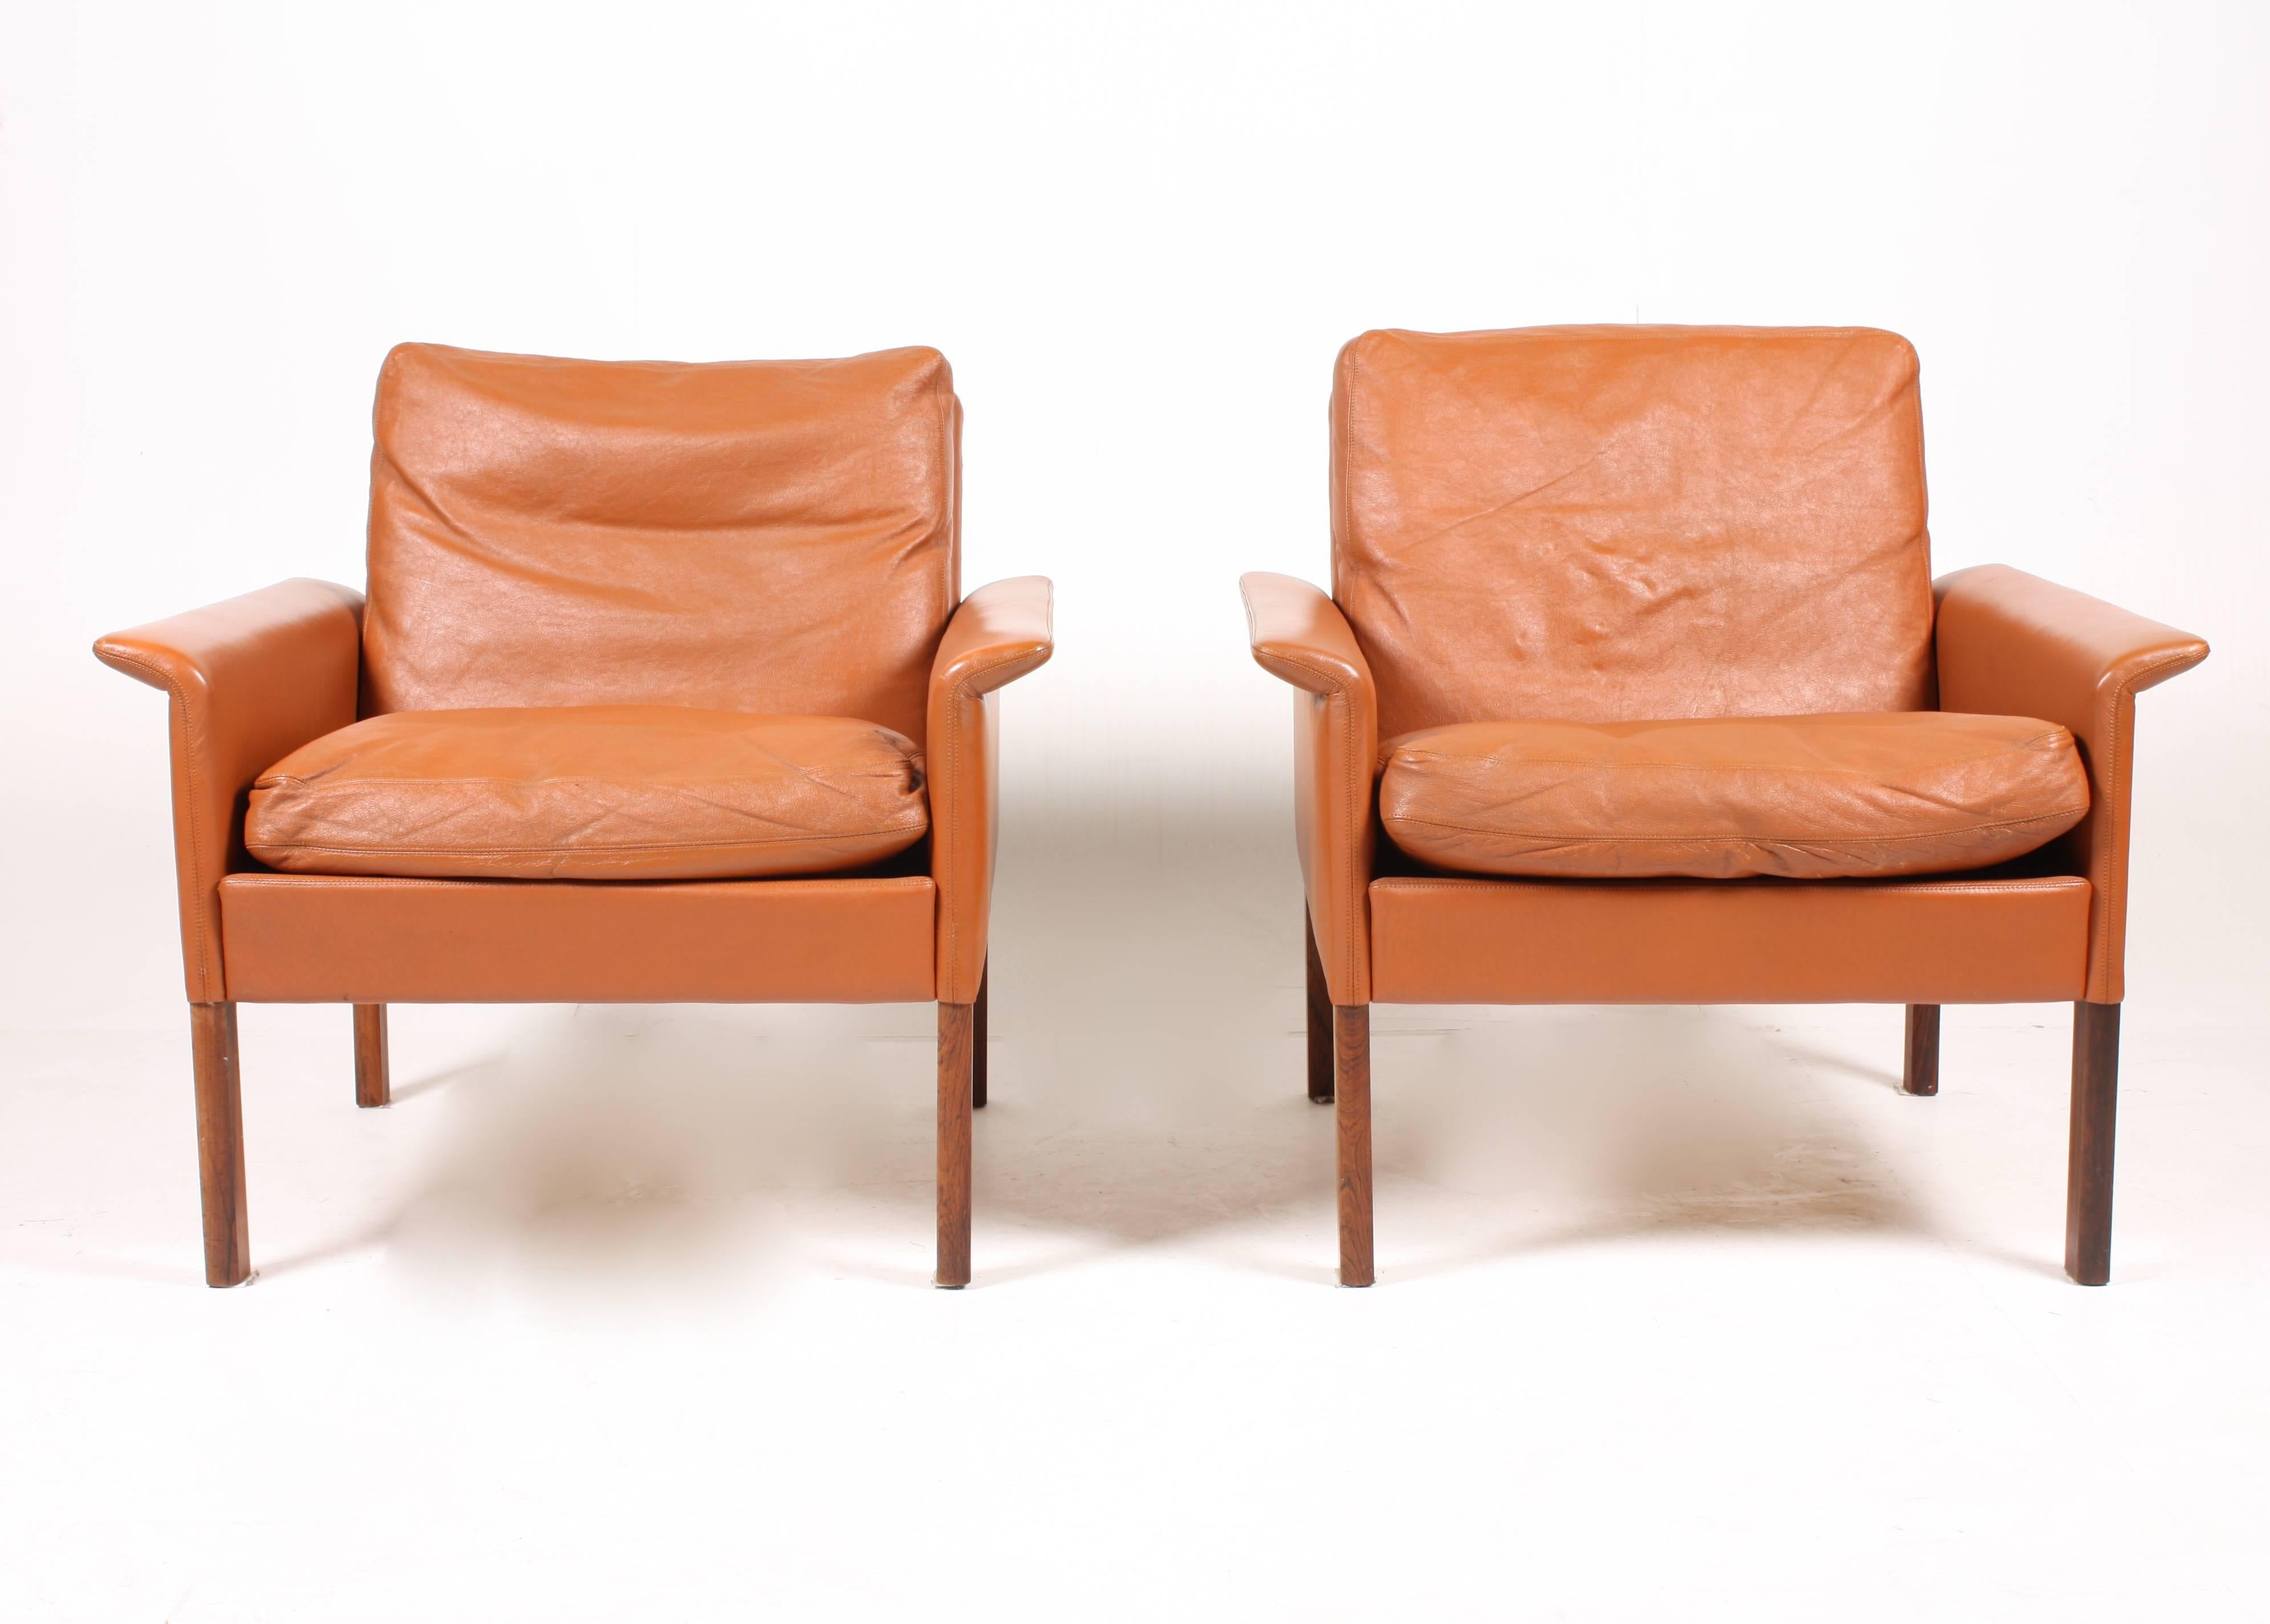 Pair of lounge chairs in patinated leather designed by Maa. Hans Olsen for CS Møbler in the 1960s. Made in Denmark. Great original condition.